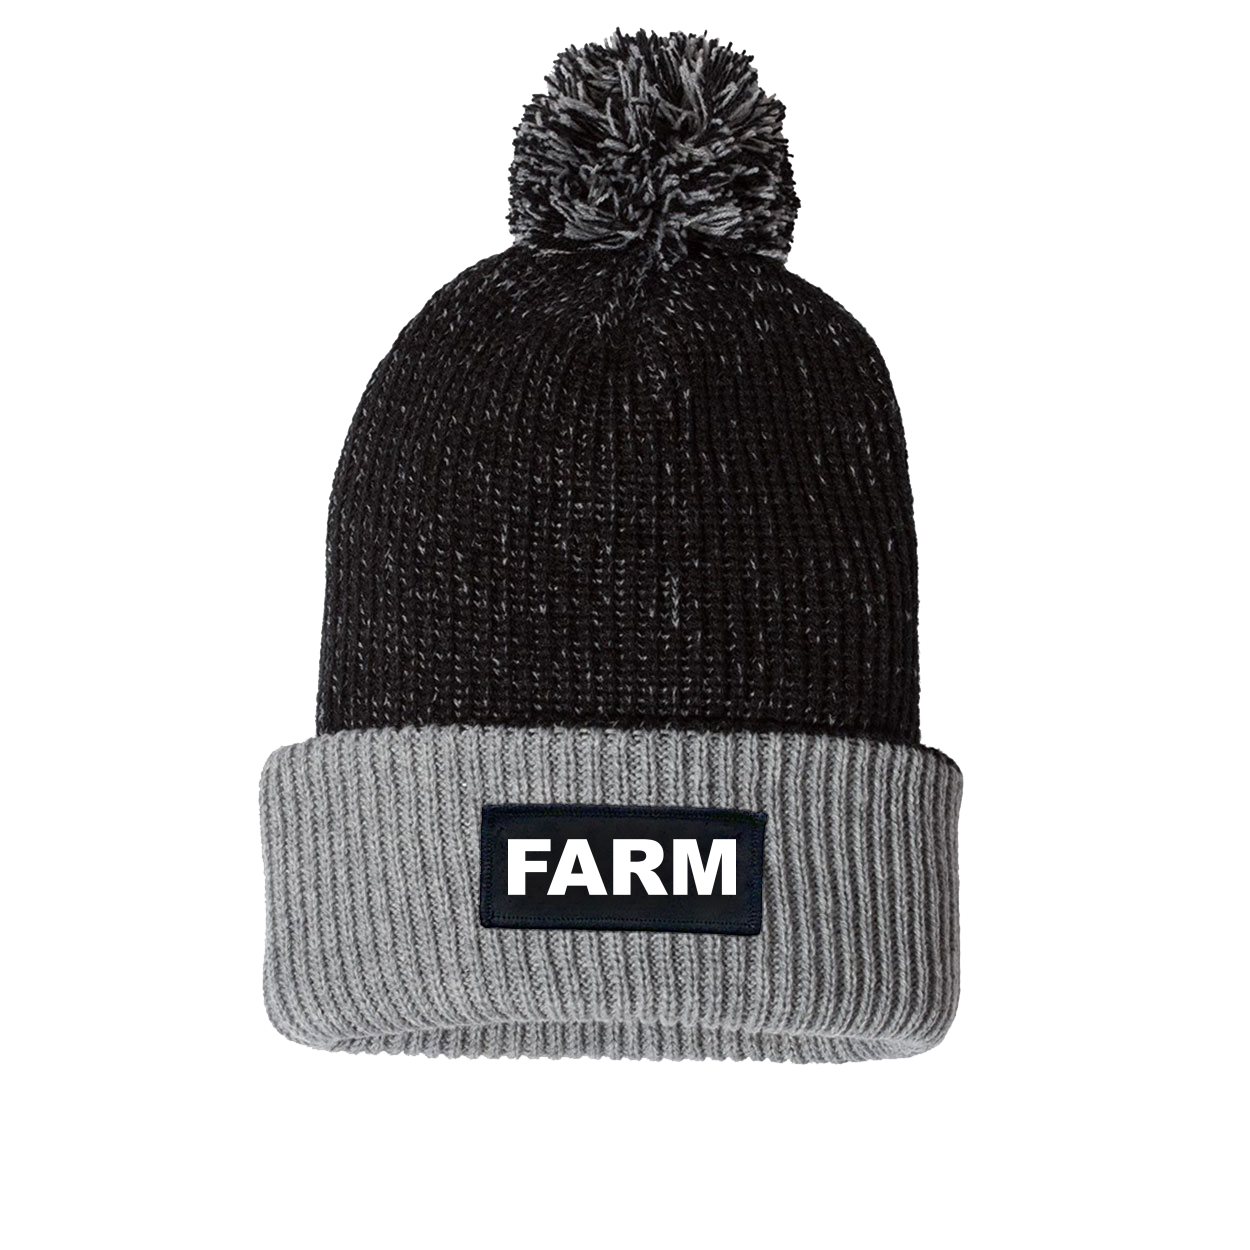 Farm Brand Logo Night Out Woven Patch Roll Up Pom Knit Beanie Black/Gray